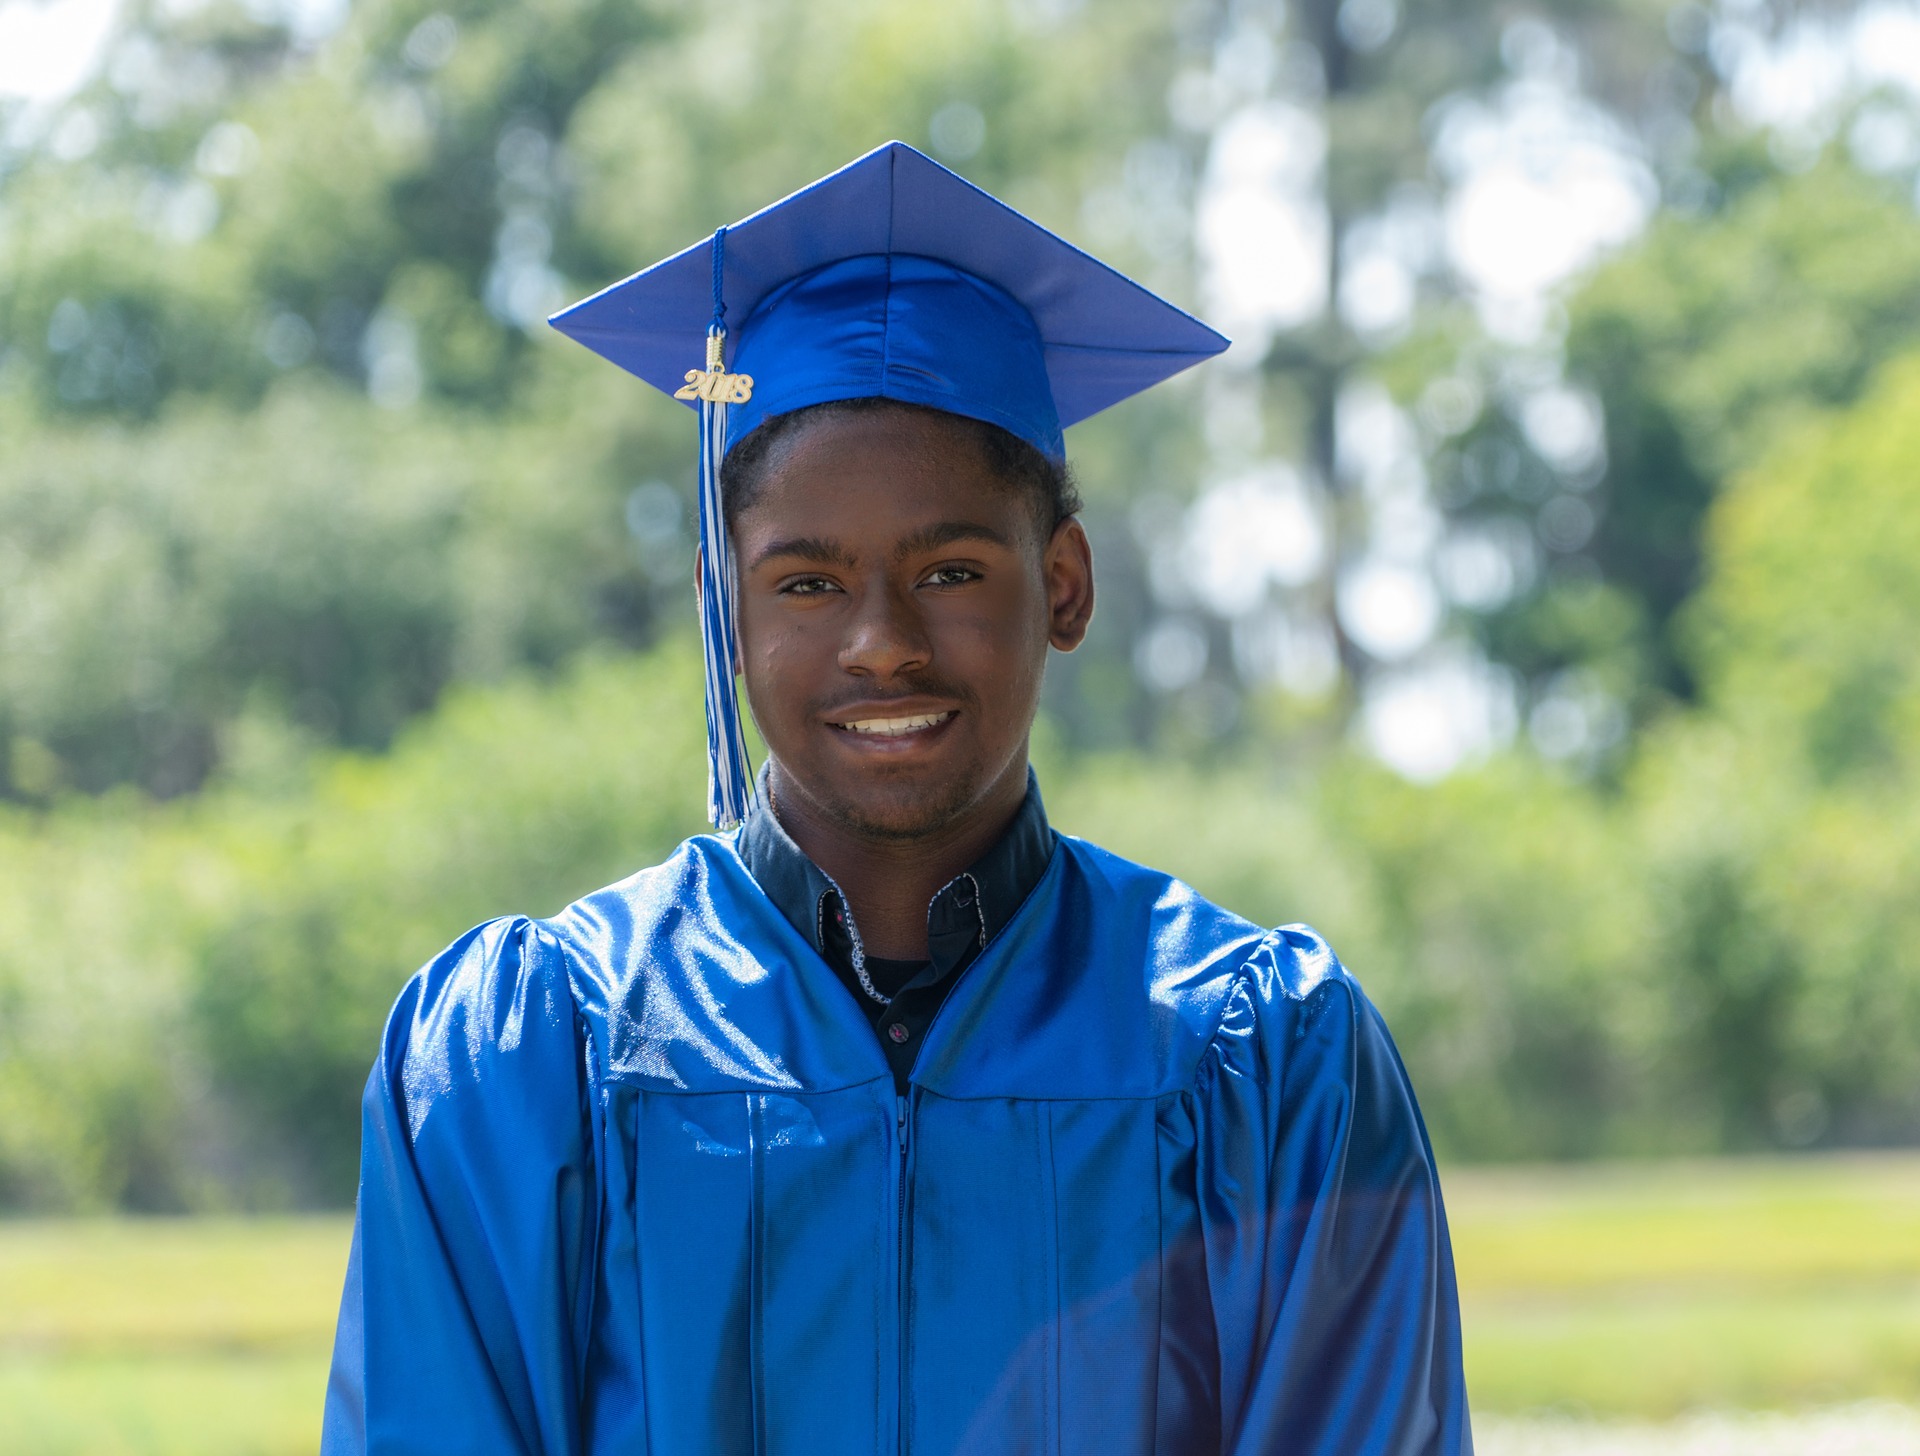 young black man in graduation gown and mortarboard